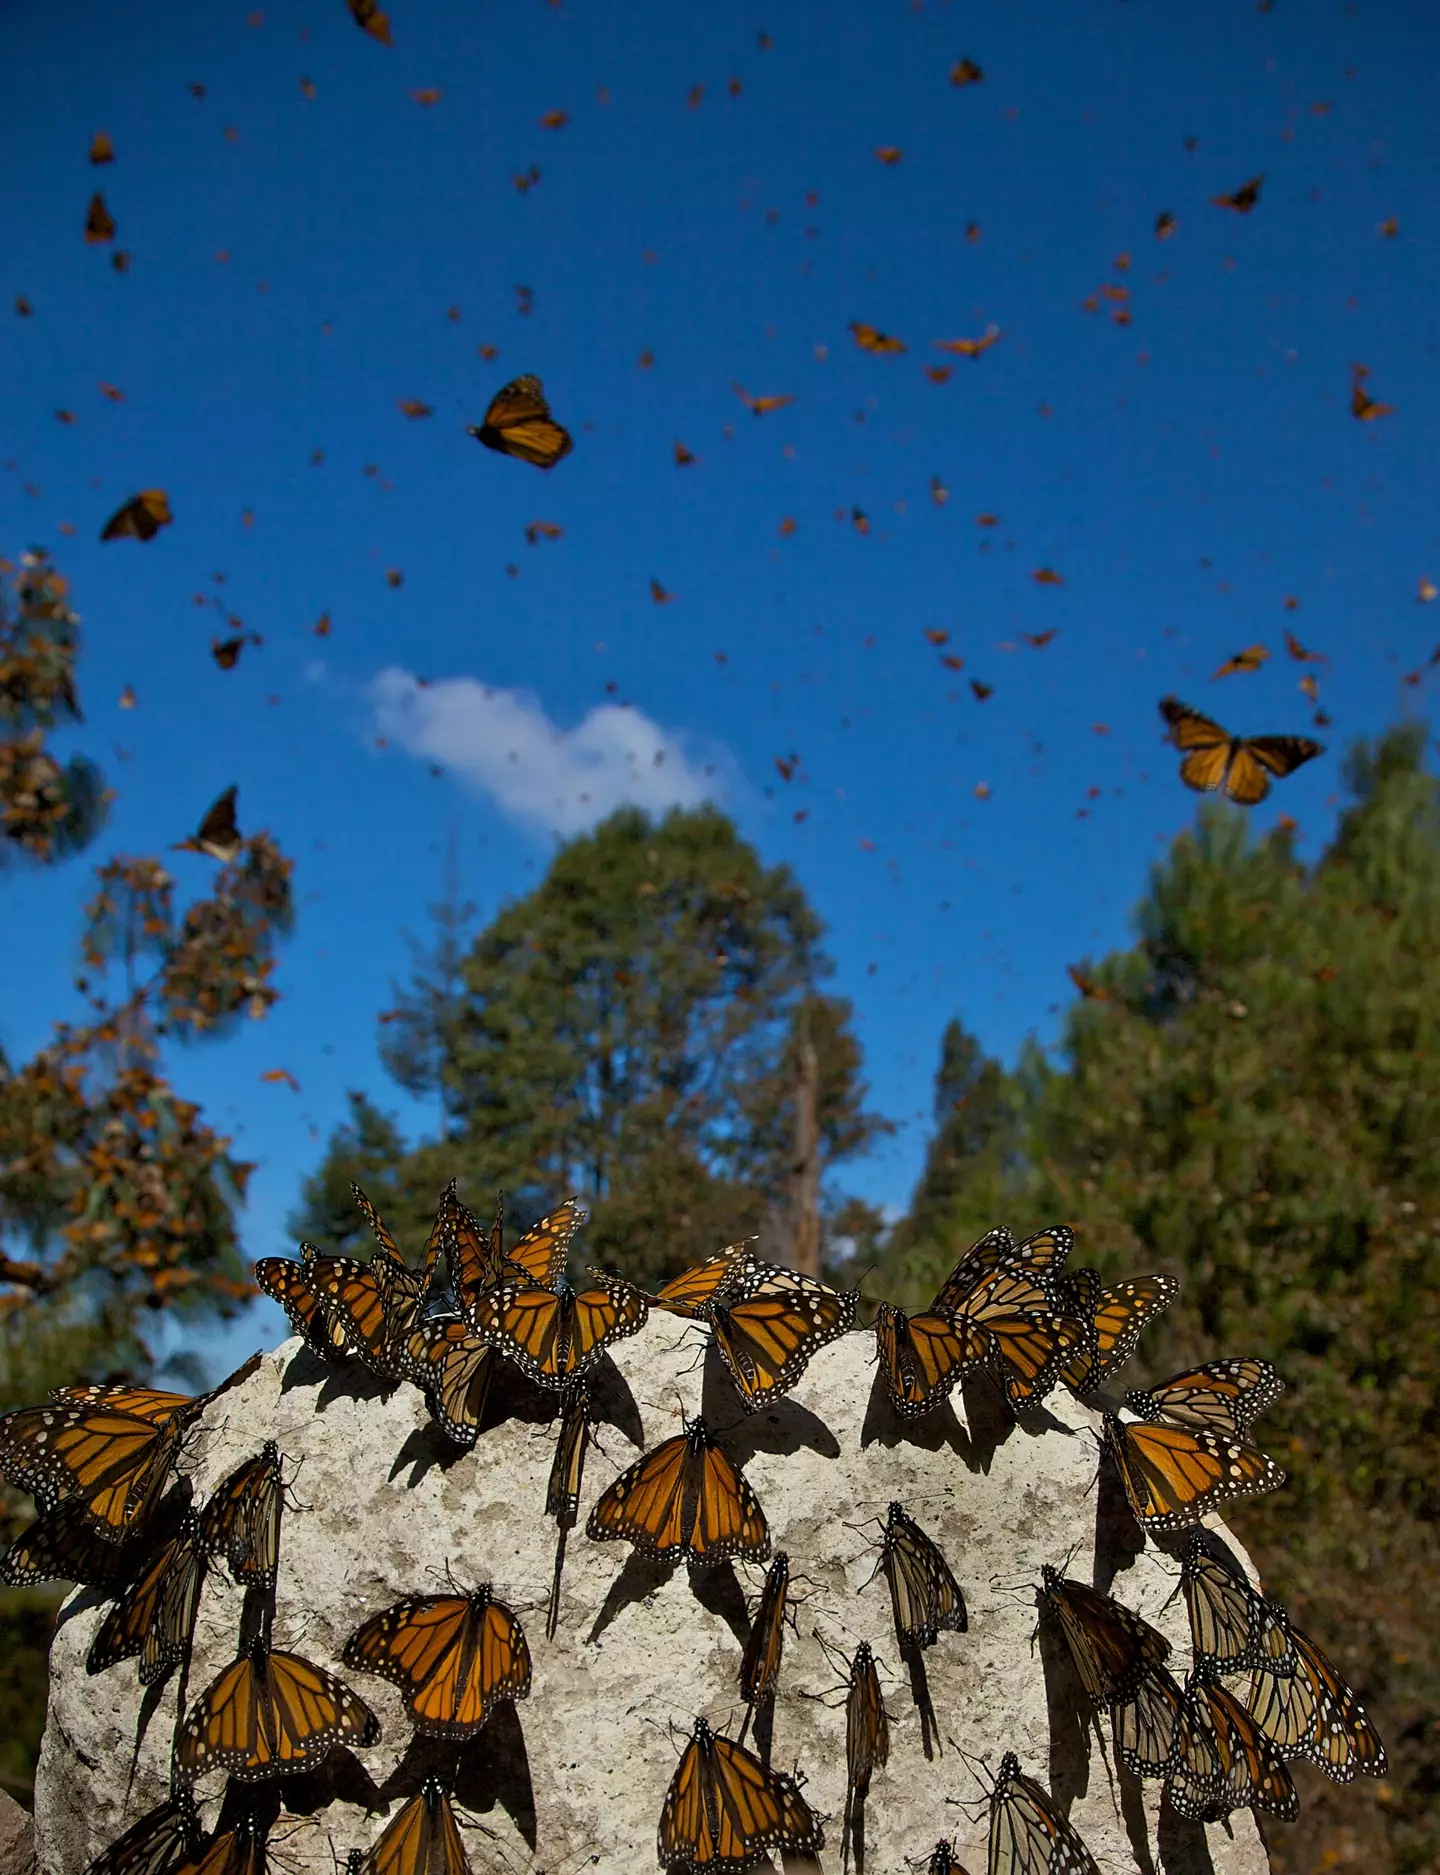 Monarch butterflies at the Monarch Butterfly Biosphere Reserve in Mexico.